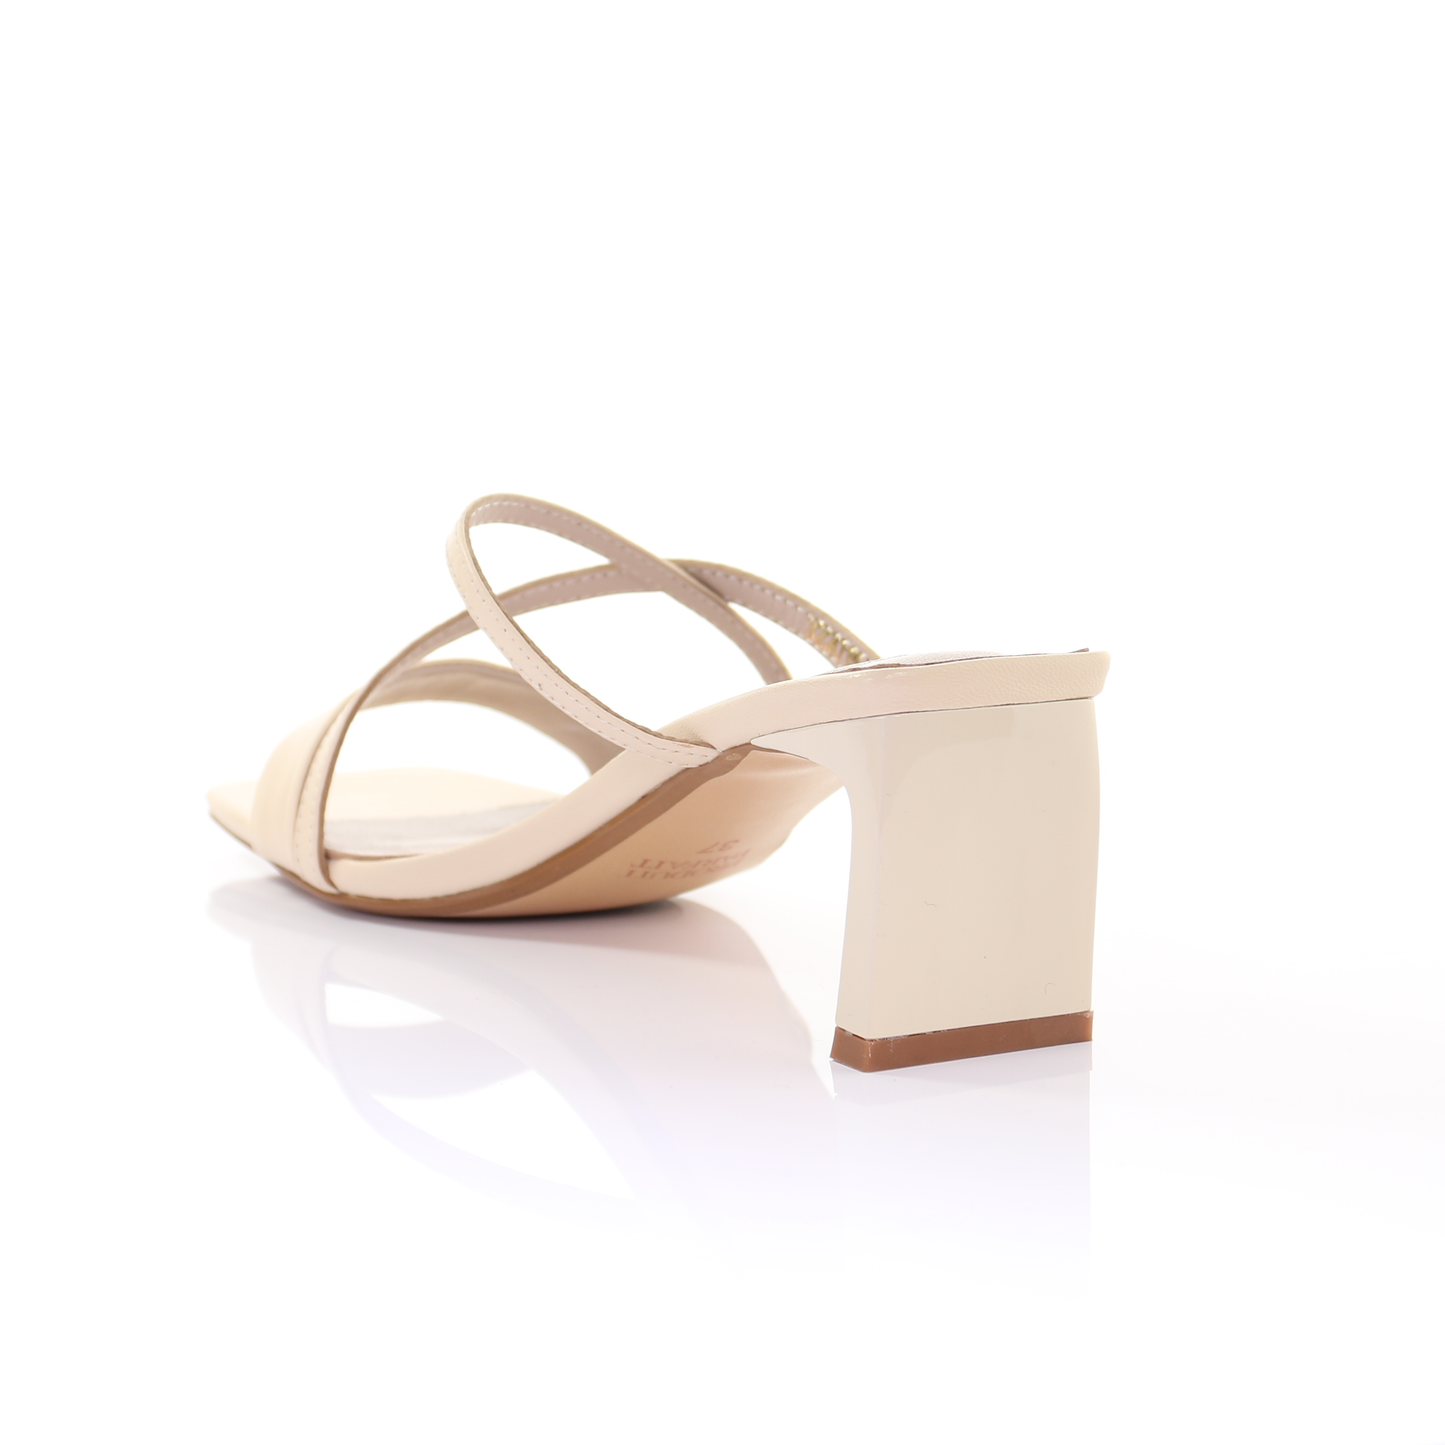 Square toe leather strappy heeled sandal- Ivory